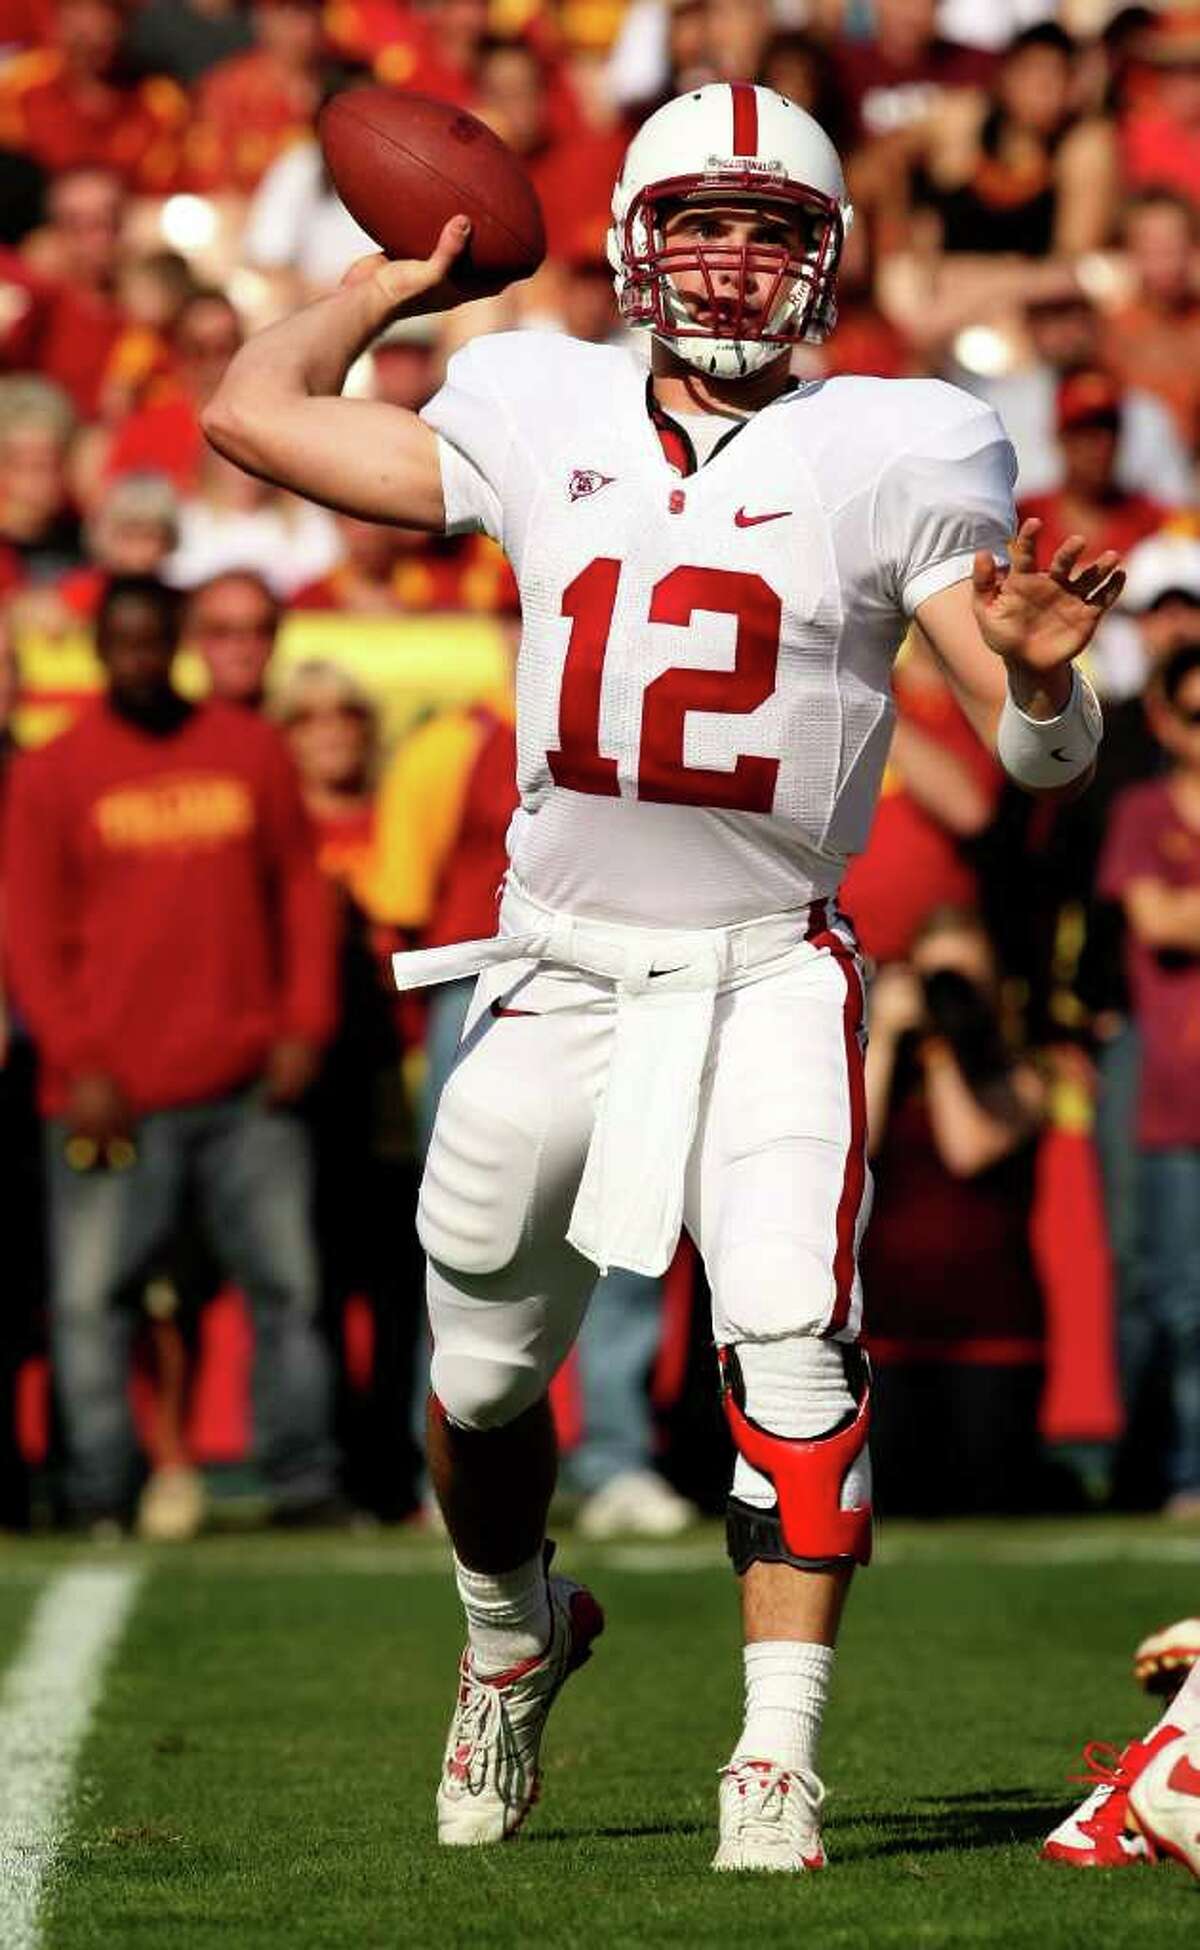 LOS ANGELES - NOVEMBER 14: Quarterback Andrew Luck #12 of the Stanford Cardinal throws a pass against the USC Trojans on November 14, 2009 at the Los Angeles Coliseum in Los Angeles, California. (Photo by Stephen Dunn/Getty Images)